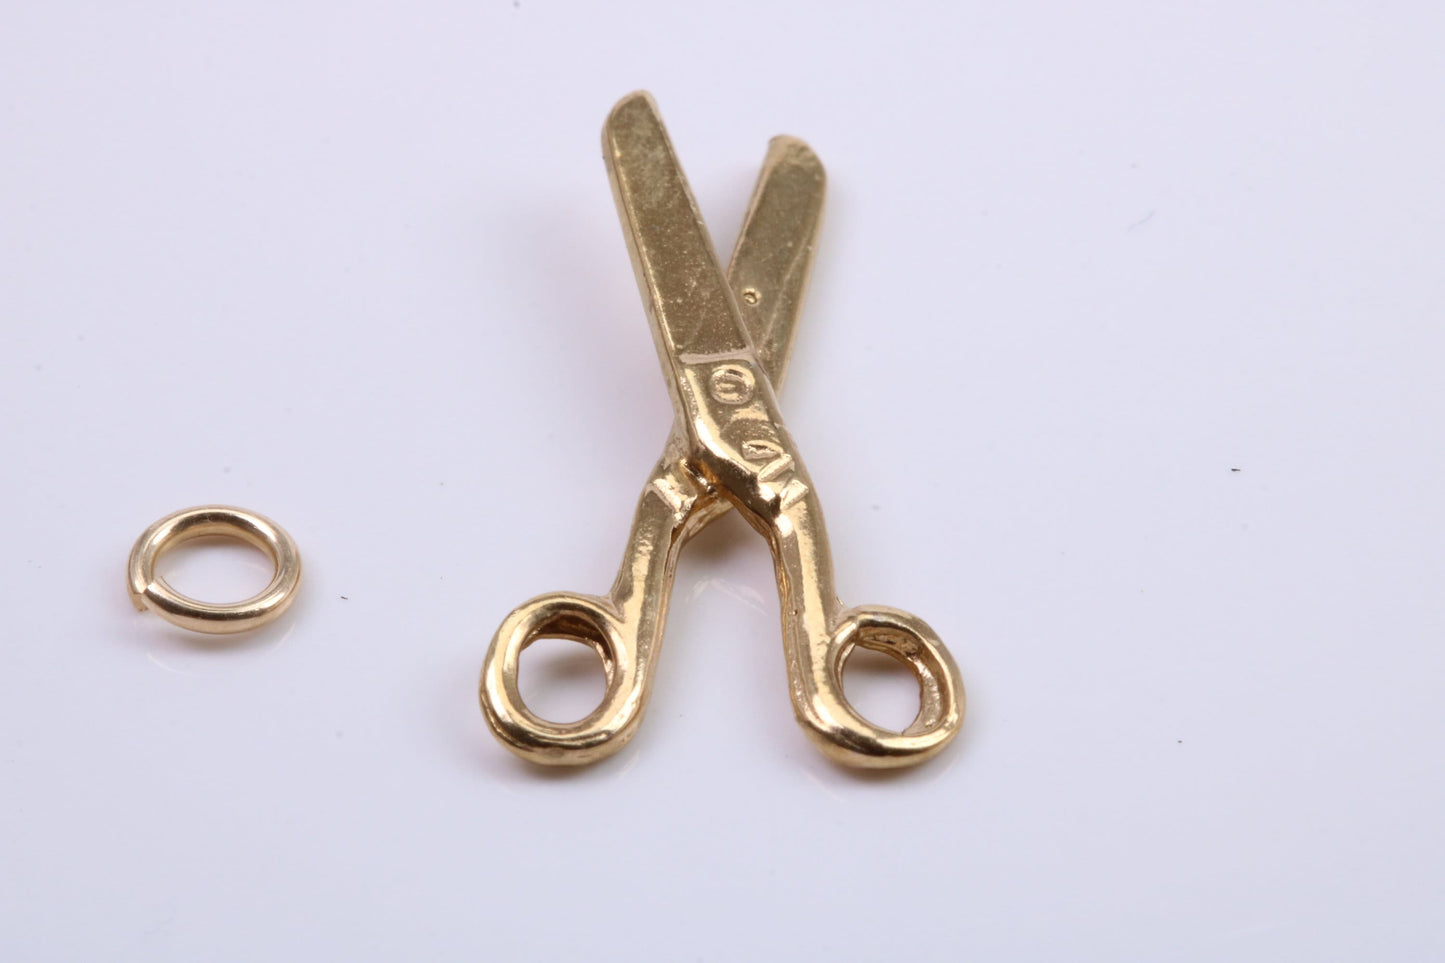 Scissor Charm, Traditional Charm, Made from Solid 9ct Yellow Gold, British Hallmarked, Complete with Attachment Link